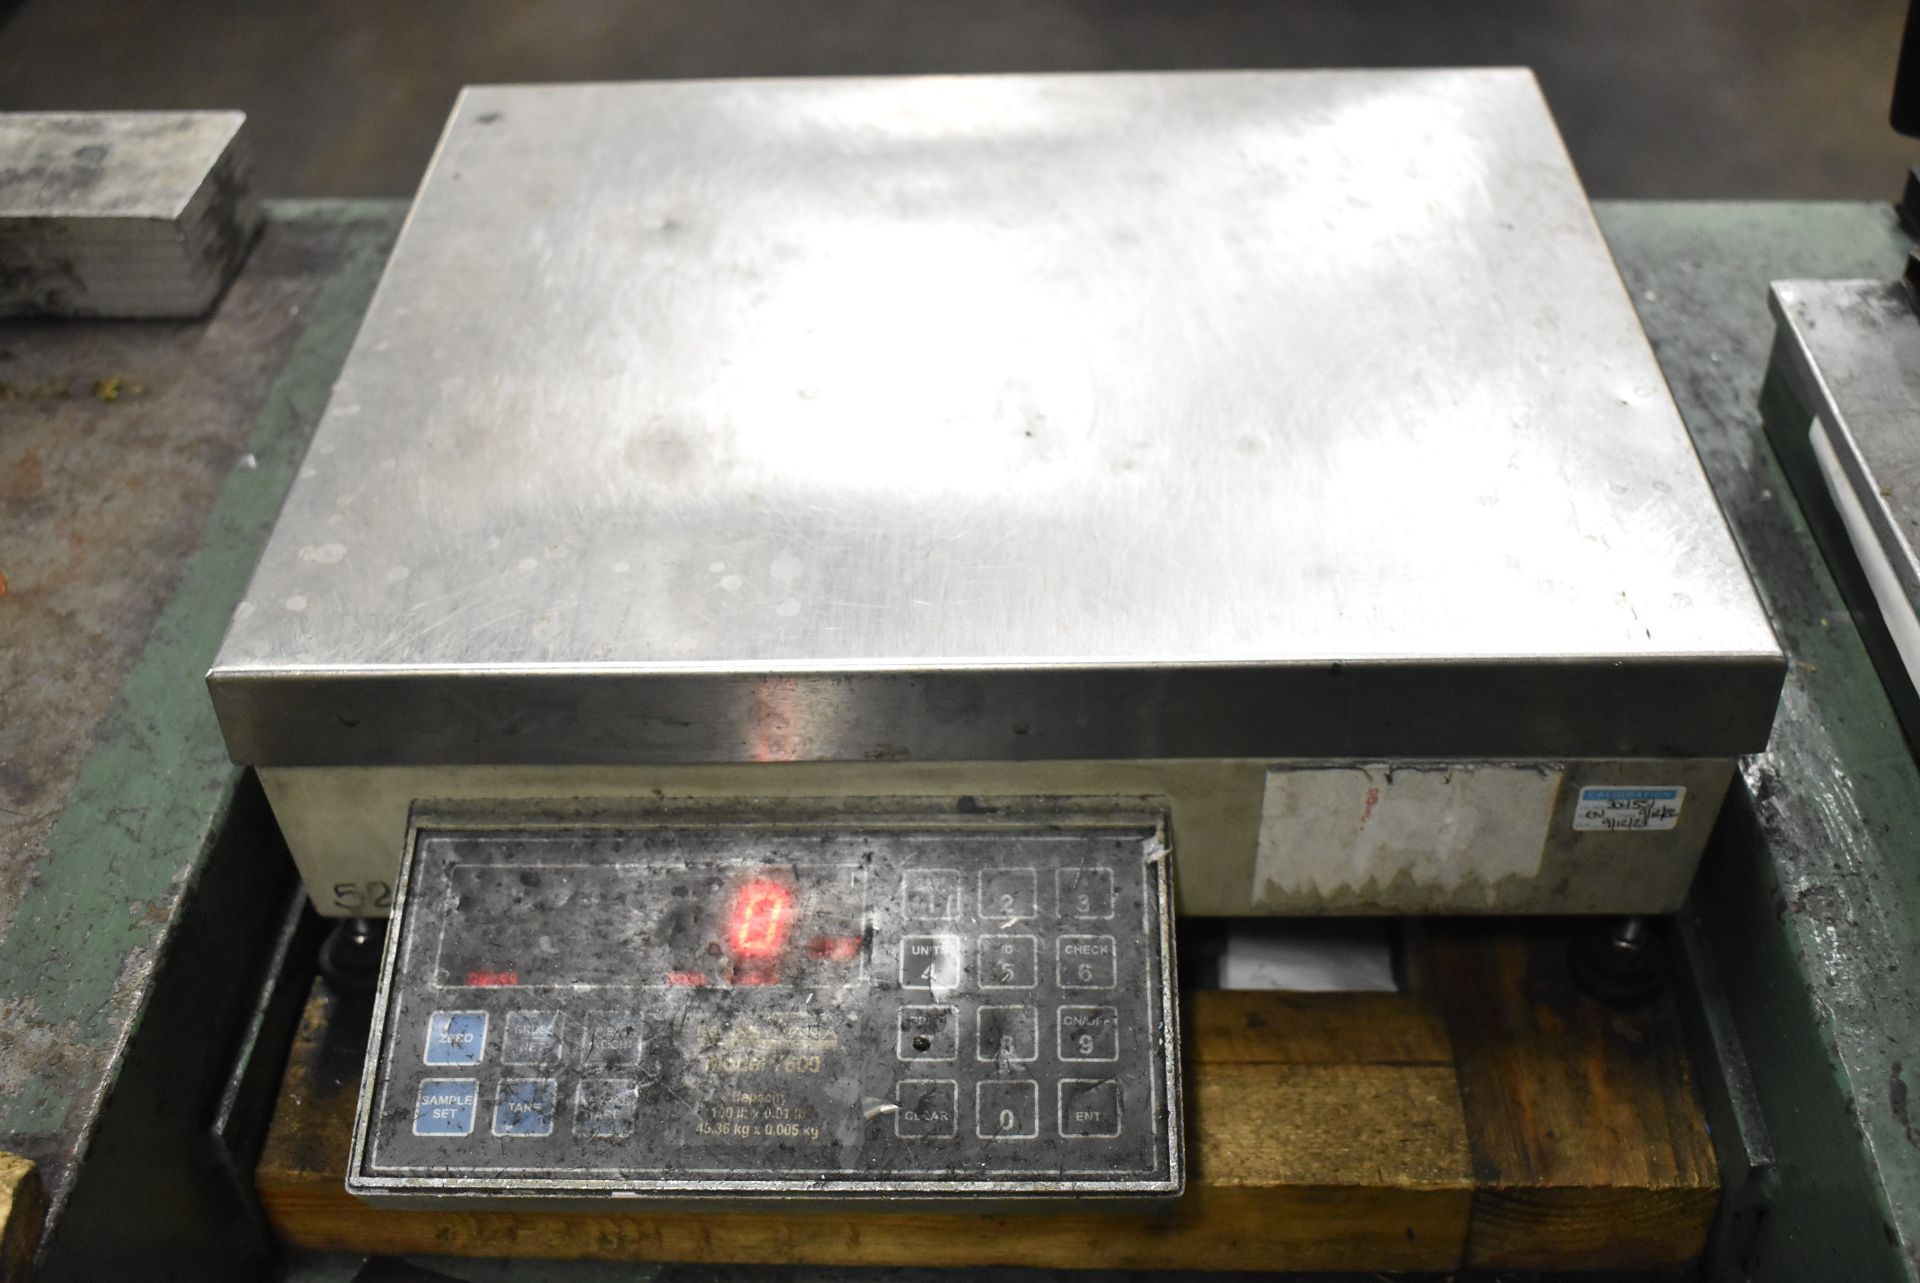 LOT/ QA STATION TABLE WITH DIGITAL SCALE - Image 2 of 2